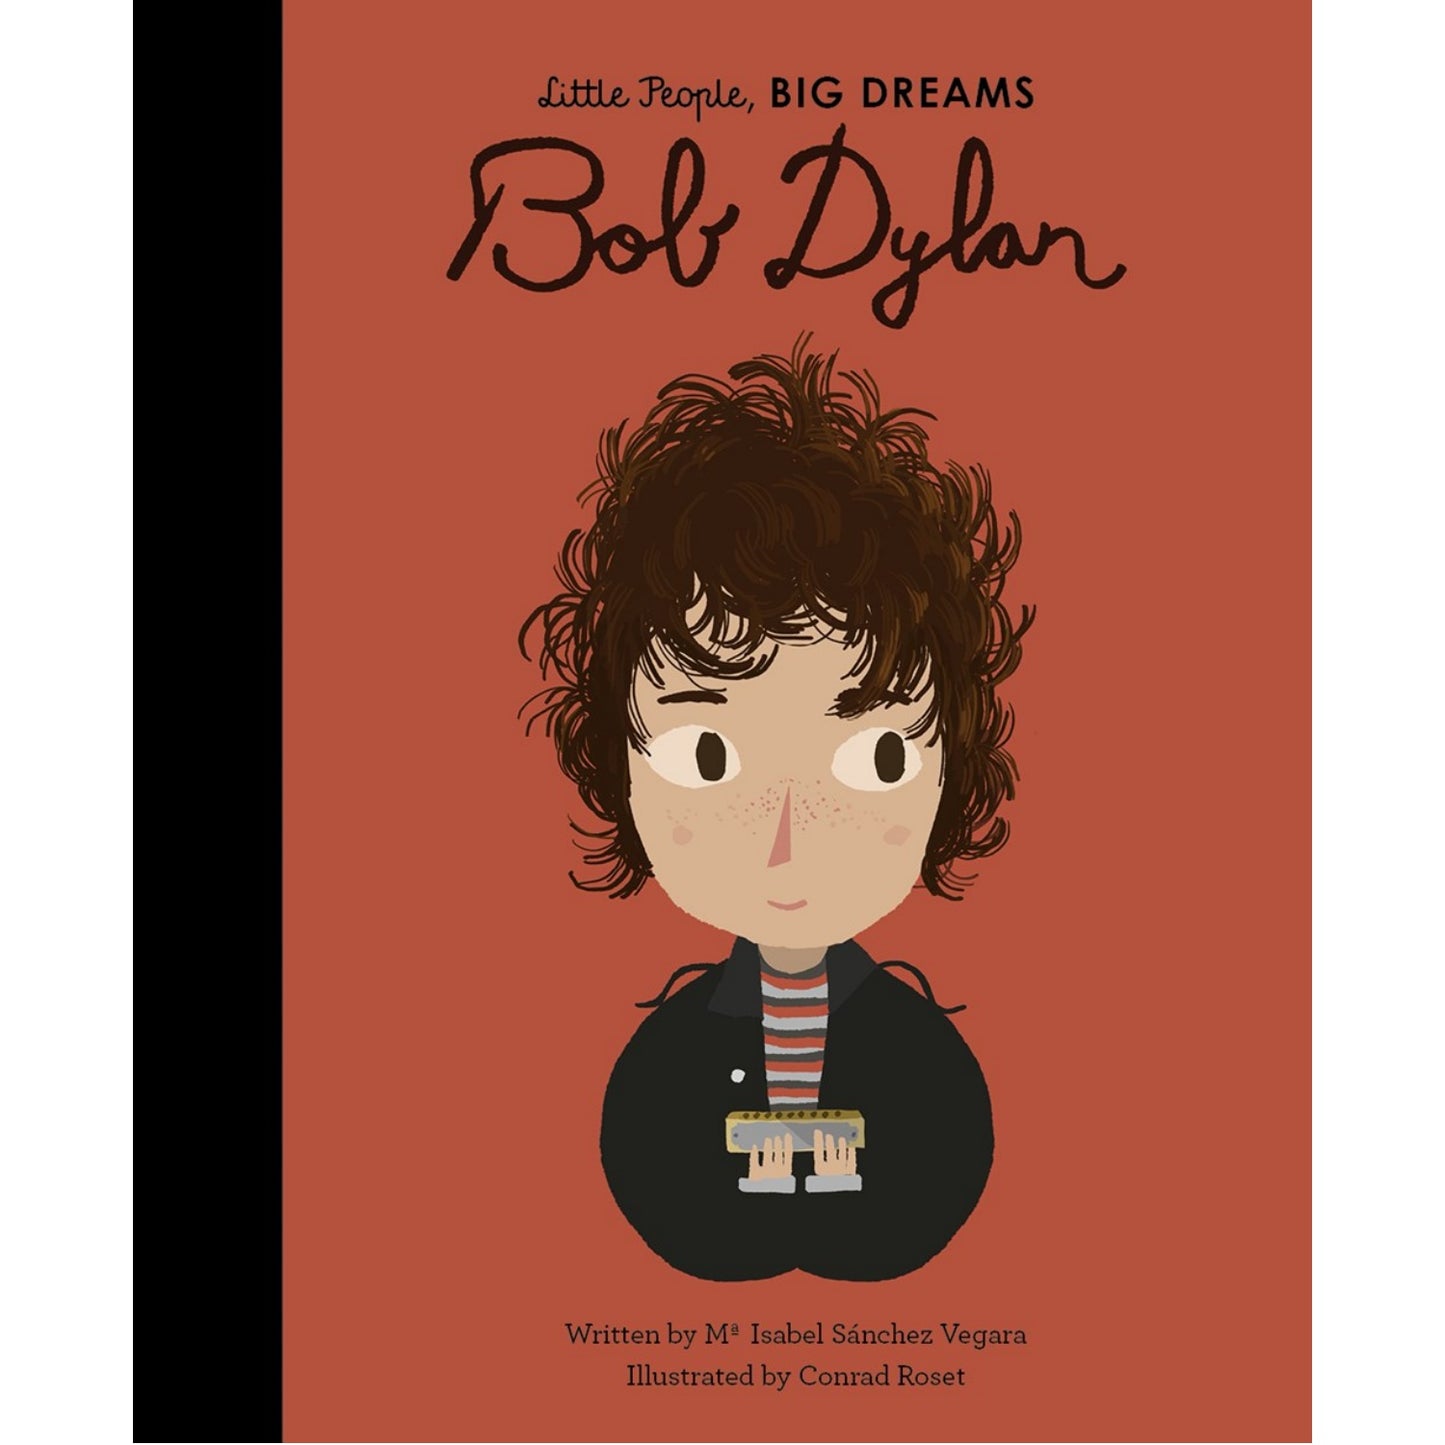 Bob Dylan | Little People, BIG DREAMS | Children’s Book on Biographies